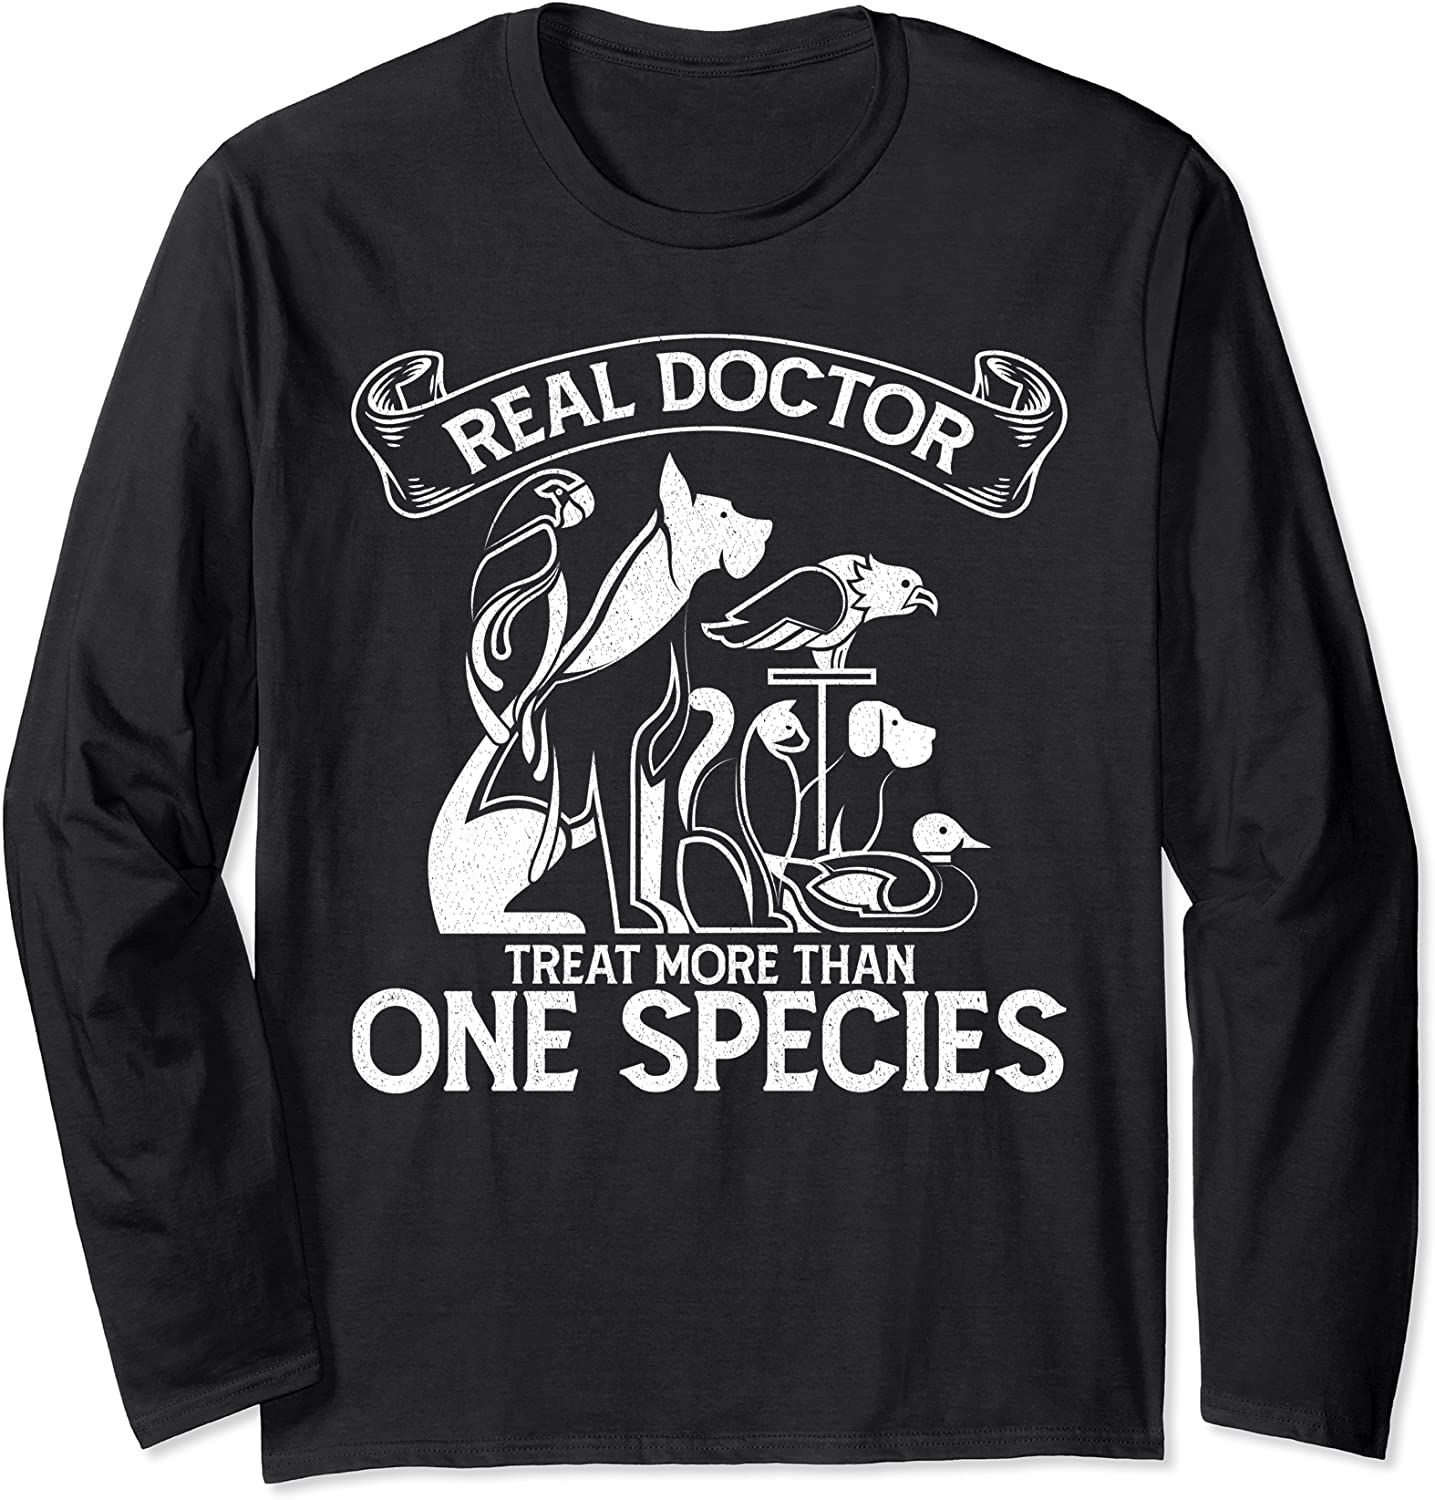 Real Docters Treat More Than One Species Long Sleeve